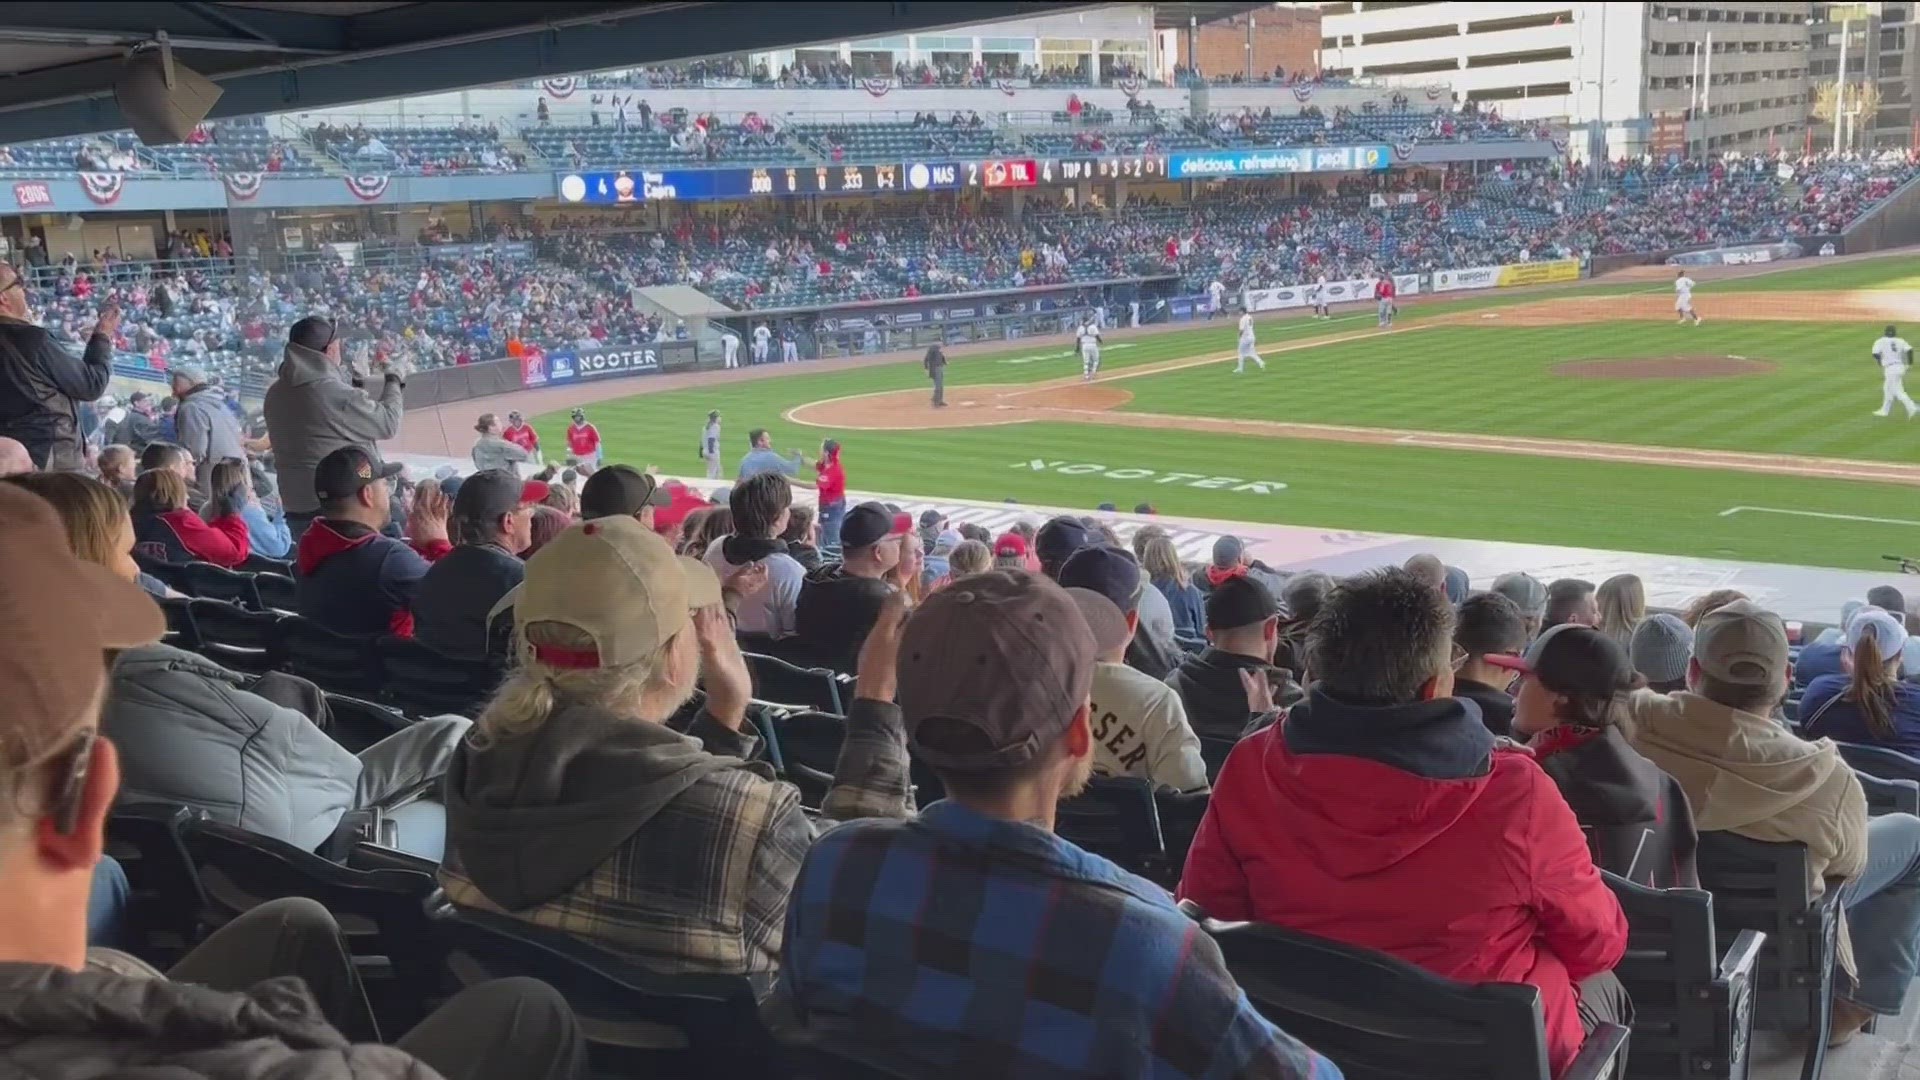 WTOL 11 was at Fifth Third Field all day long to capture the excitement of Opening Day.